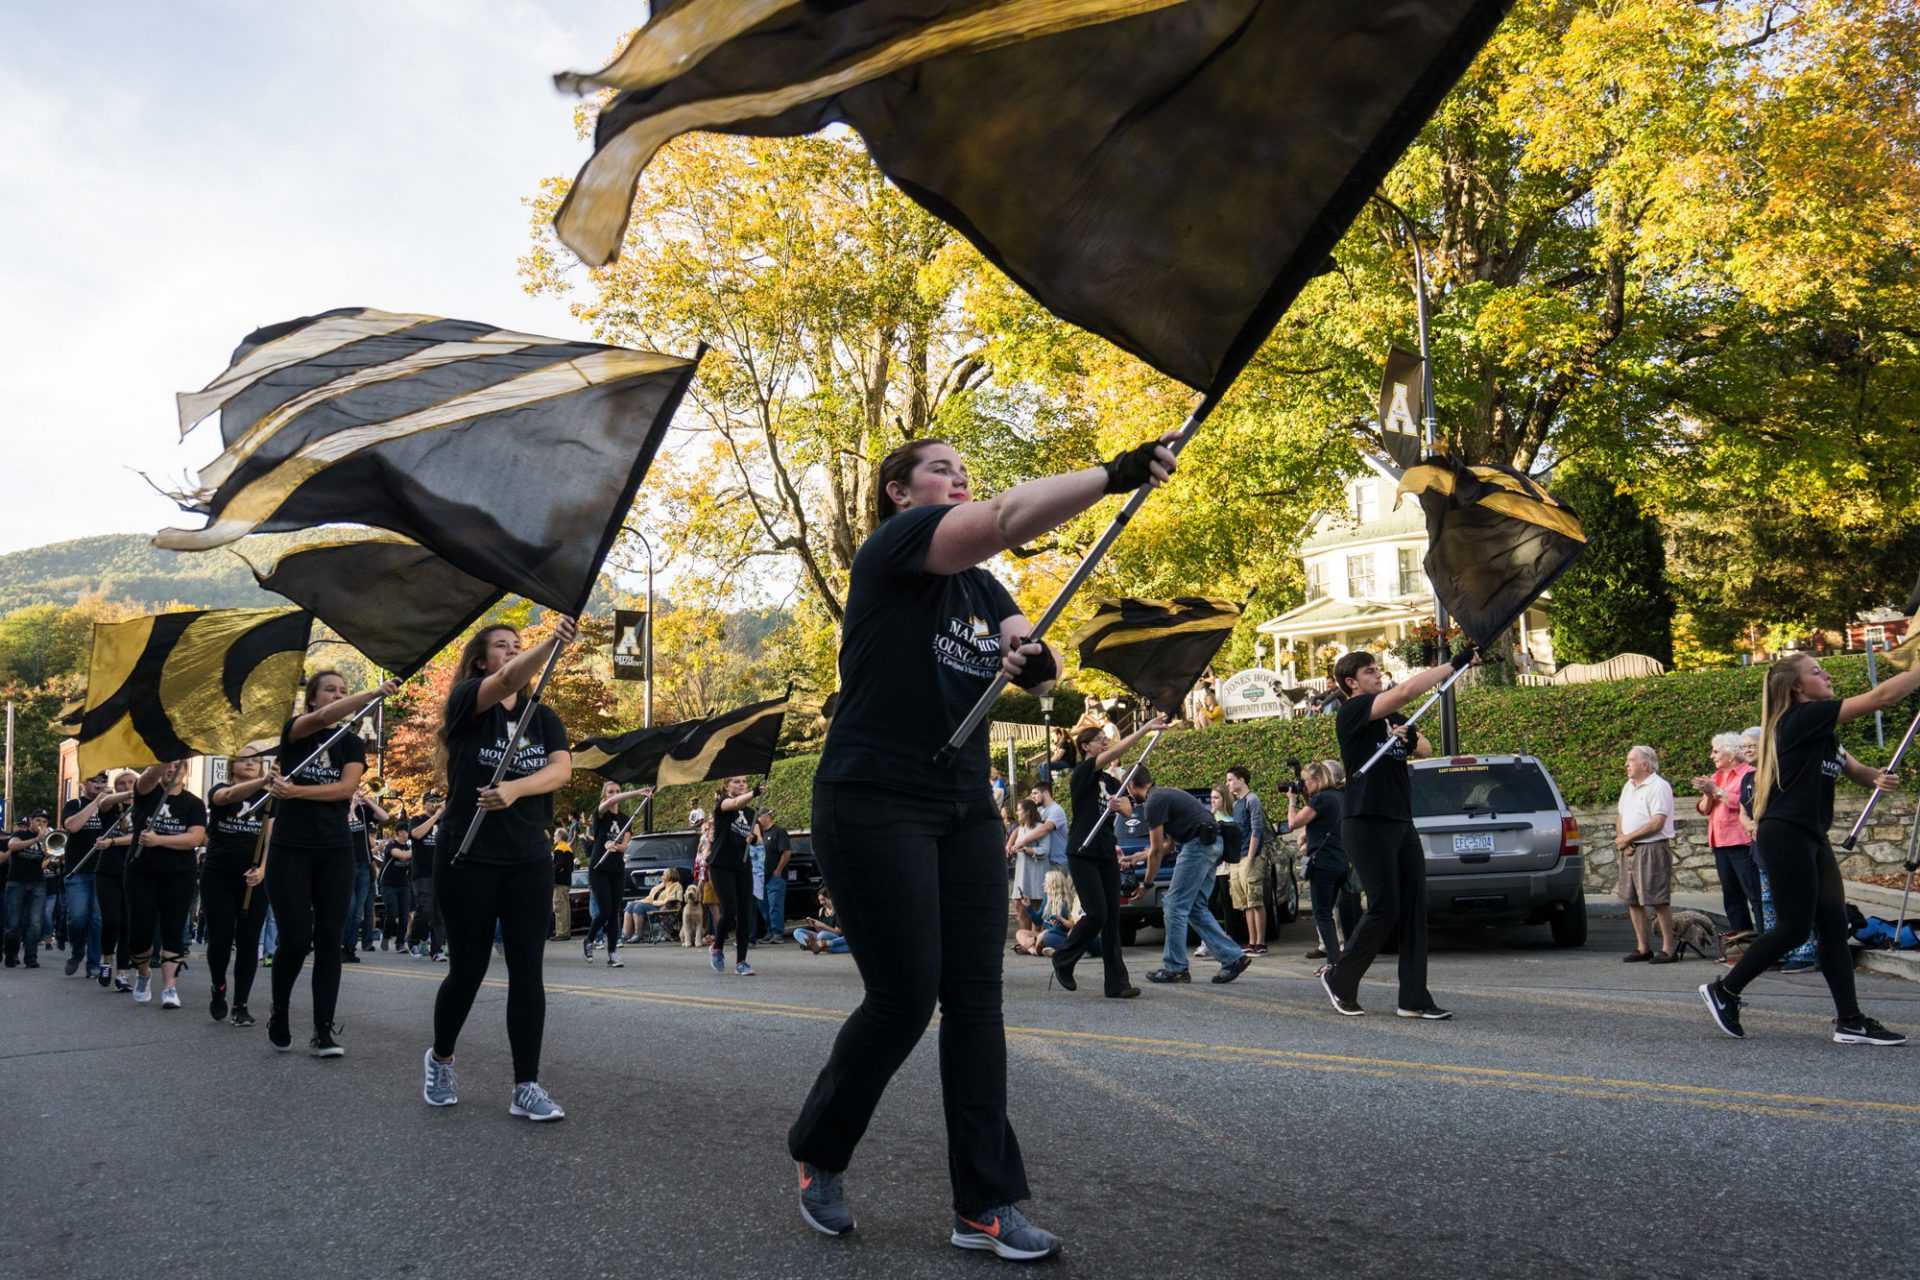 Members of App State’s Color Guard fly their flags with pride at the Homecoming parade.